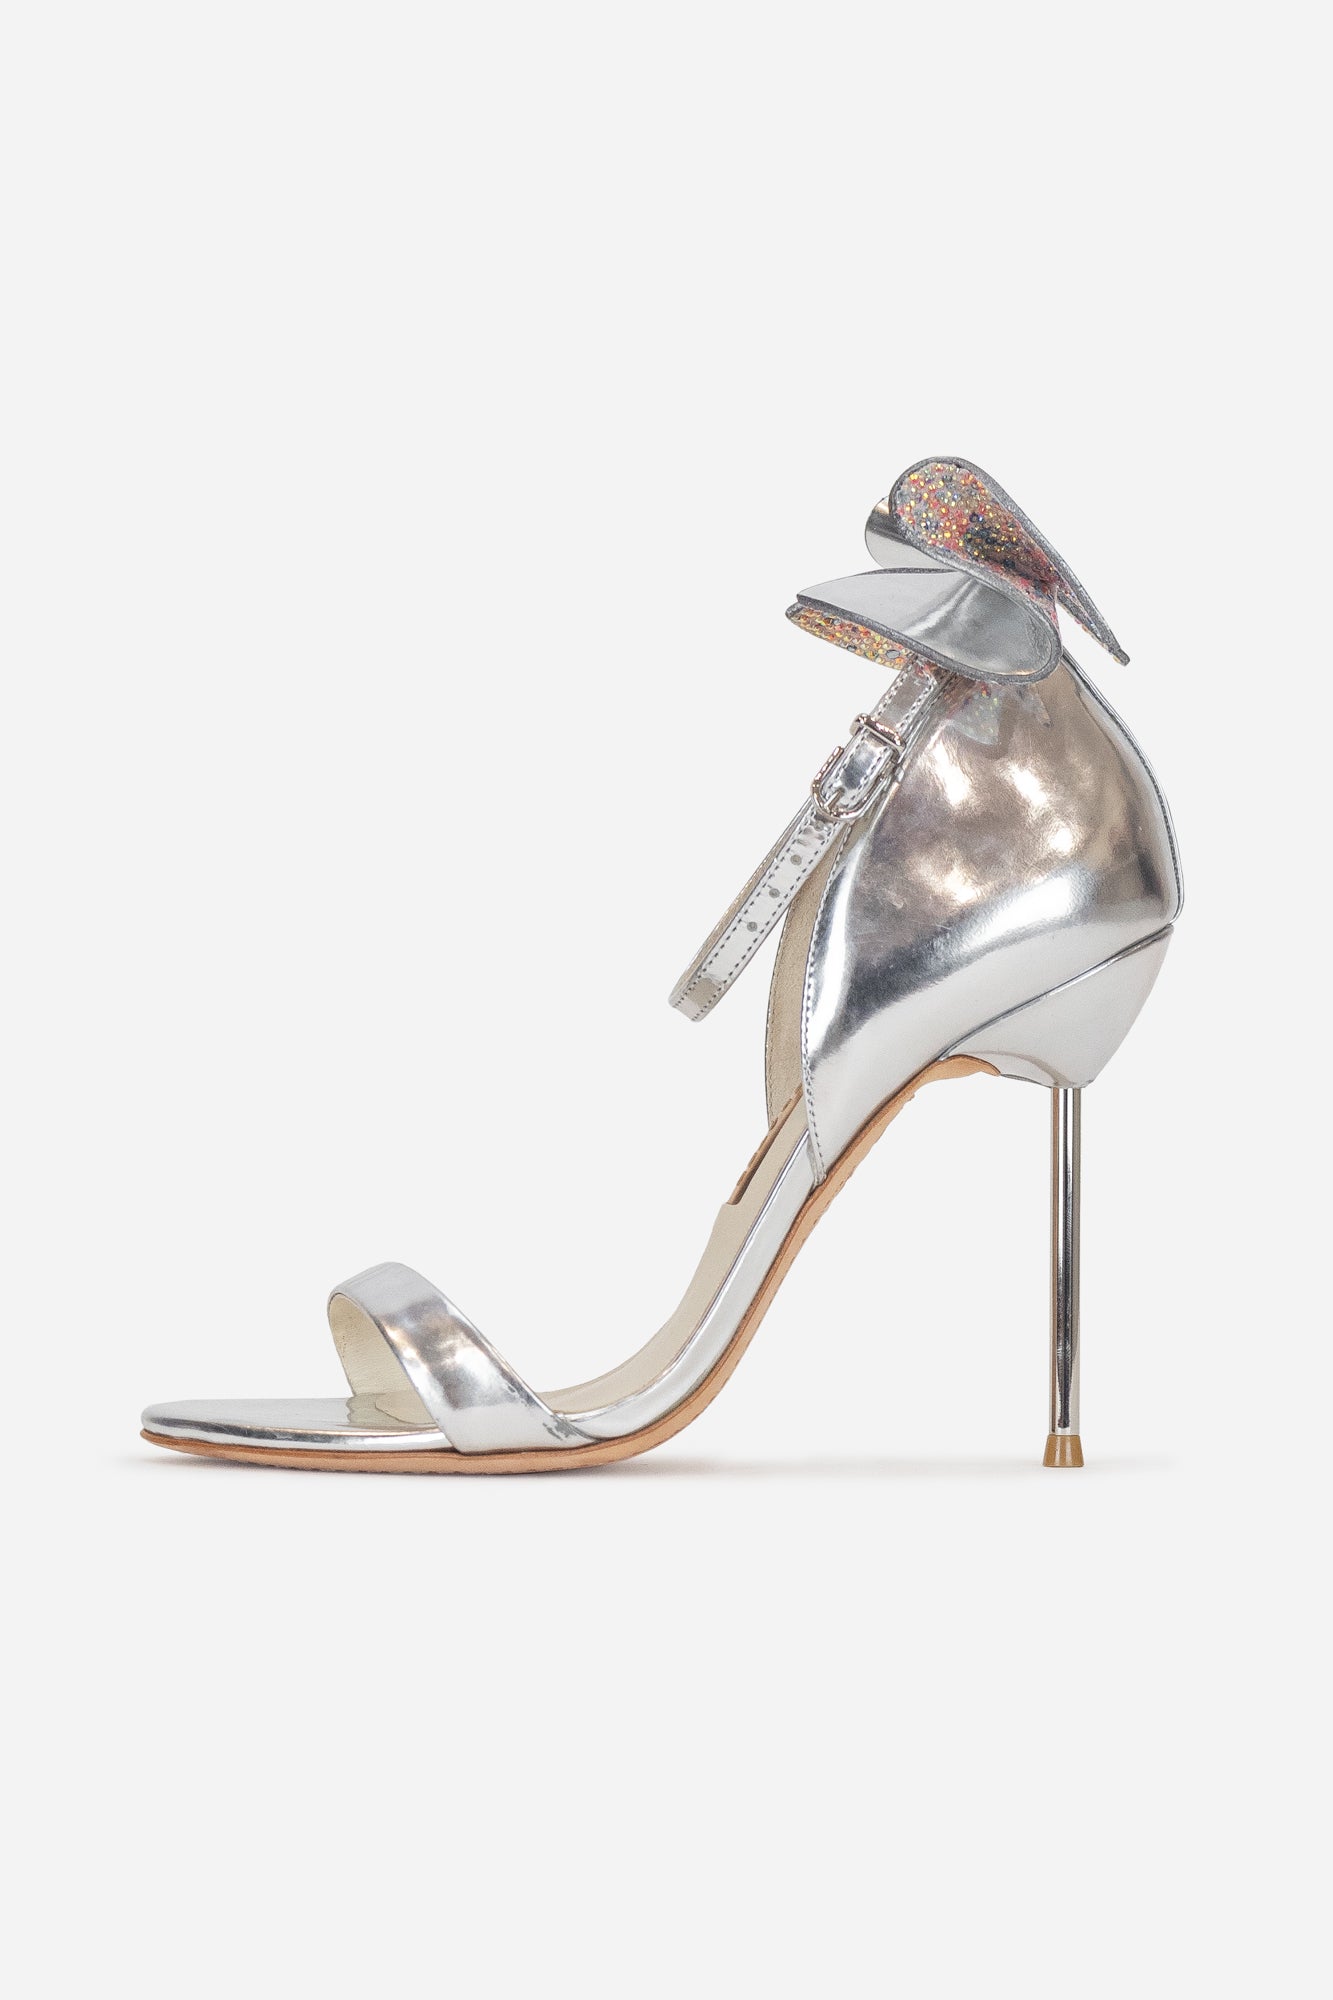 Silver Bow Heels With Pink + Blue Gemstones